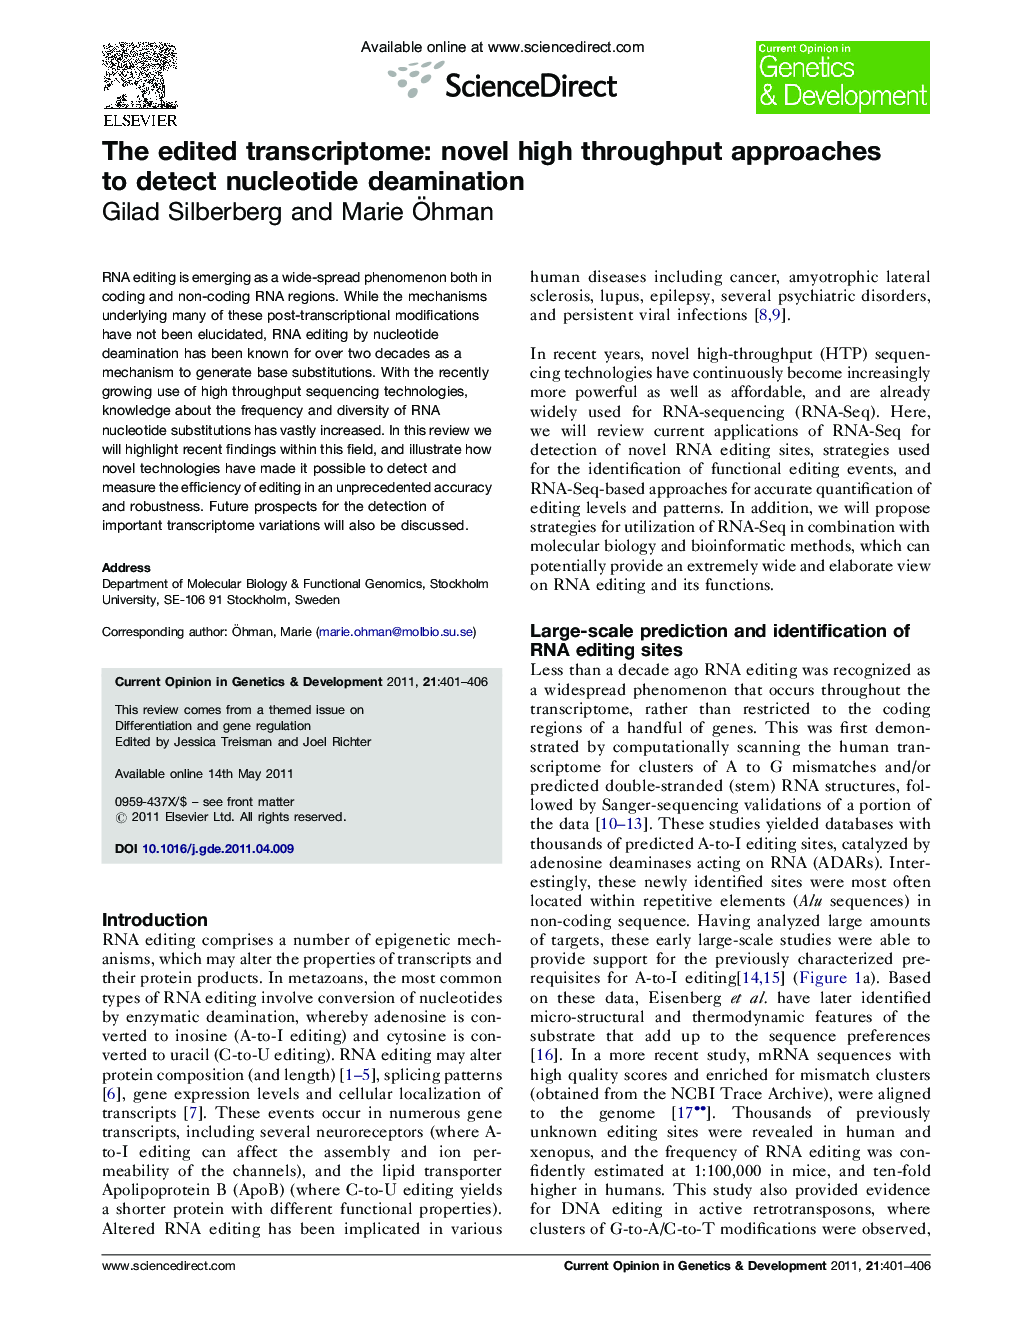 The edited transcriptome: novel high throughput approaches to detect nucleotide deamination